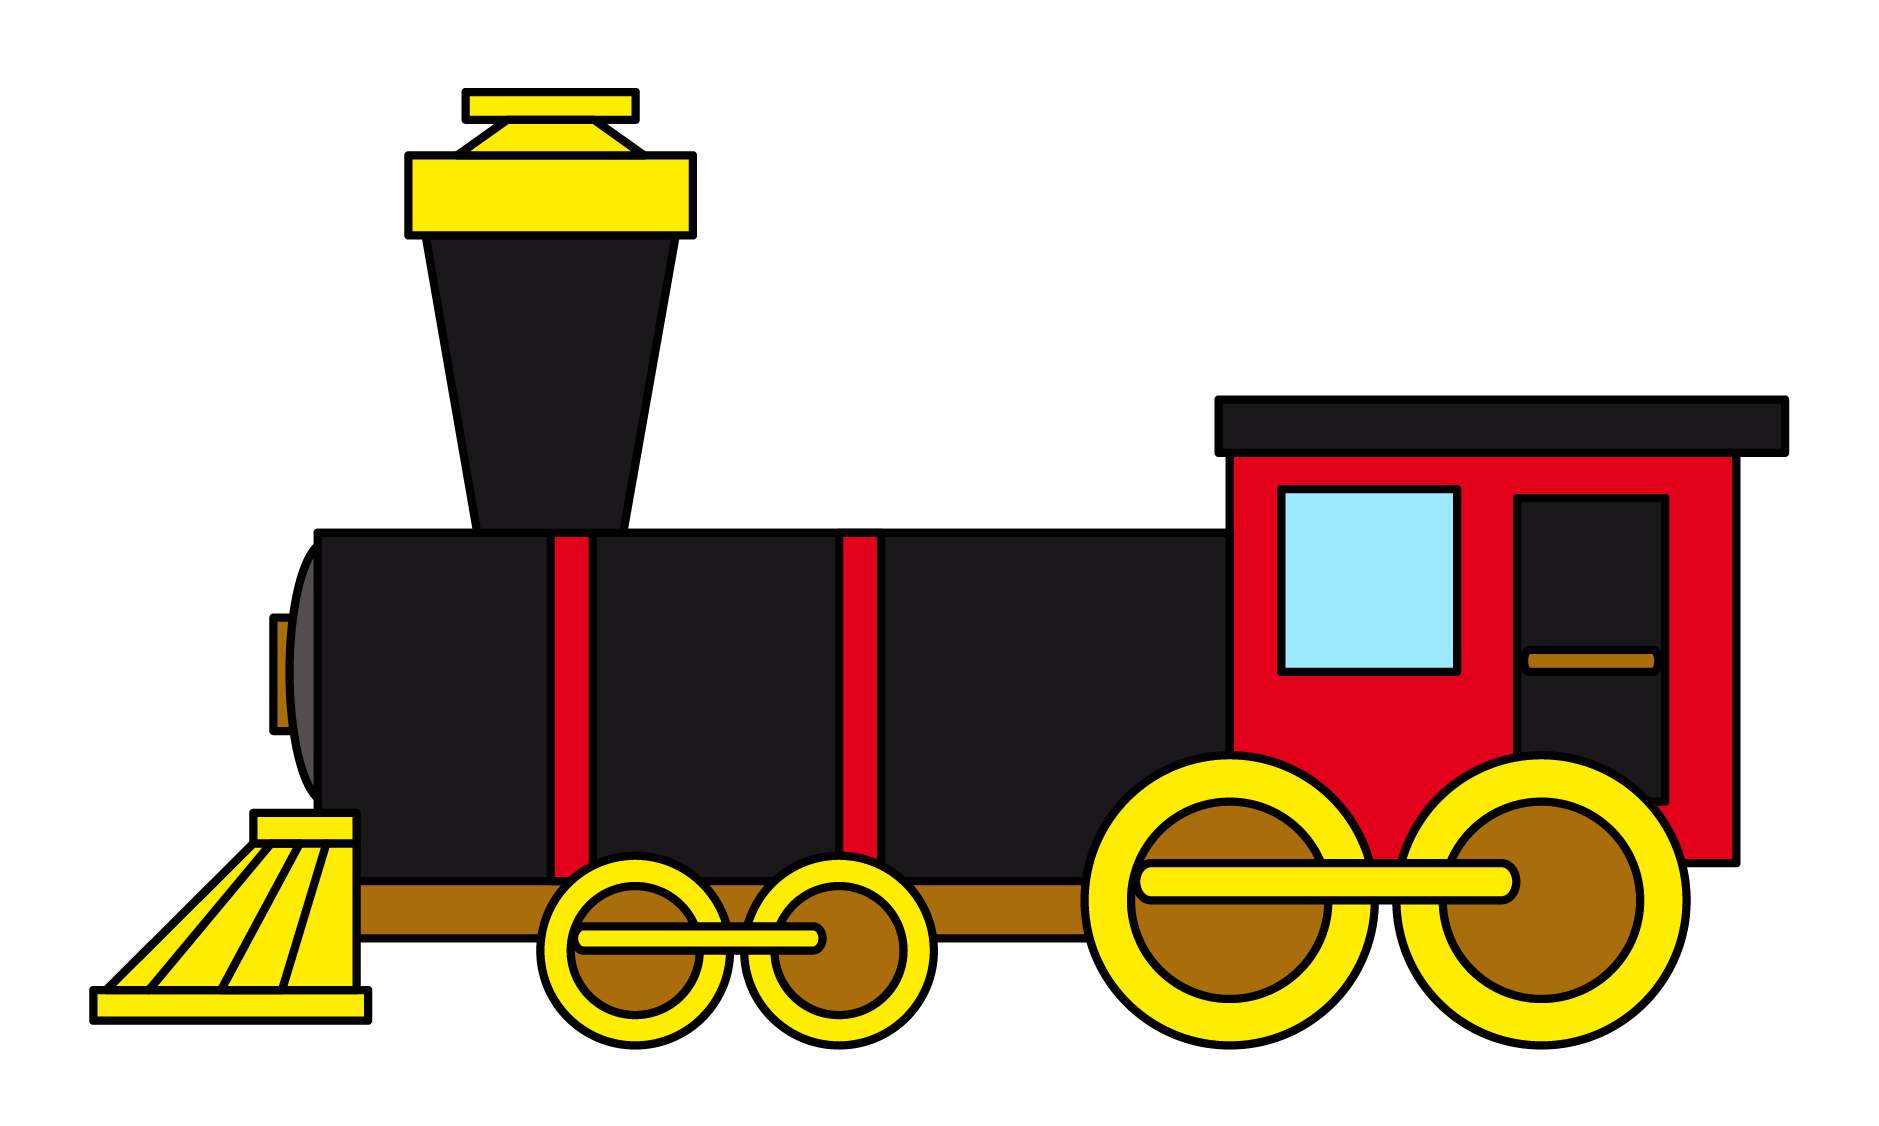 Train free to use clip art 2 - Trains Clipart